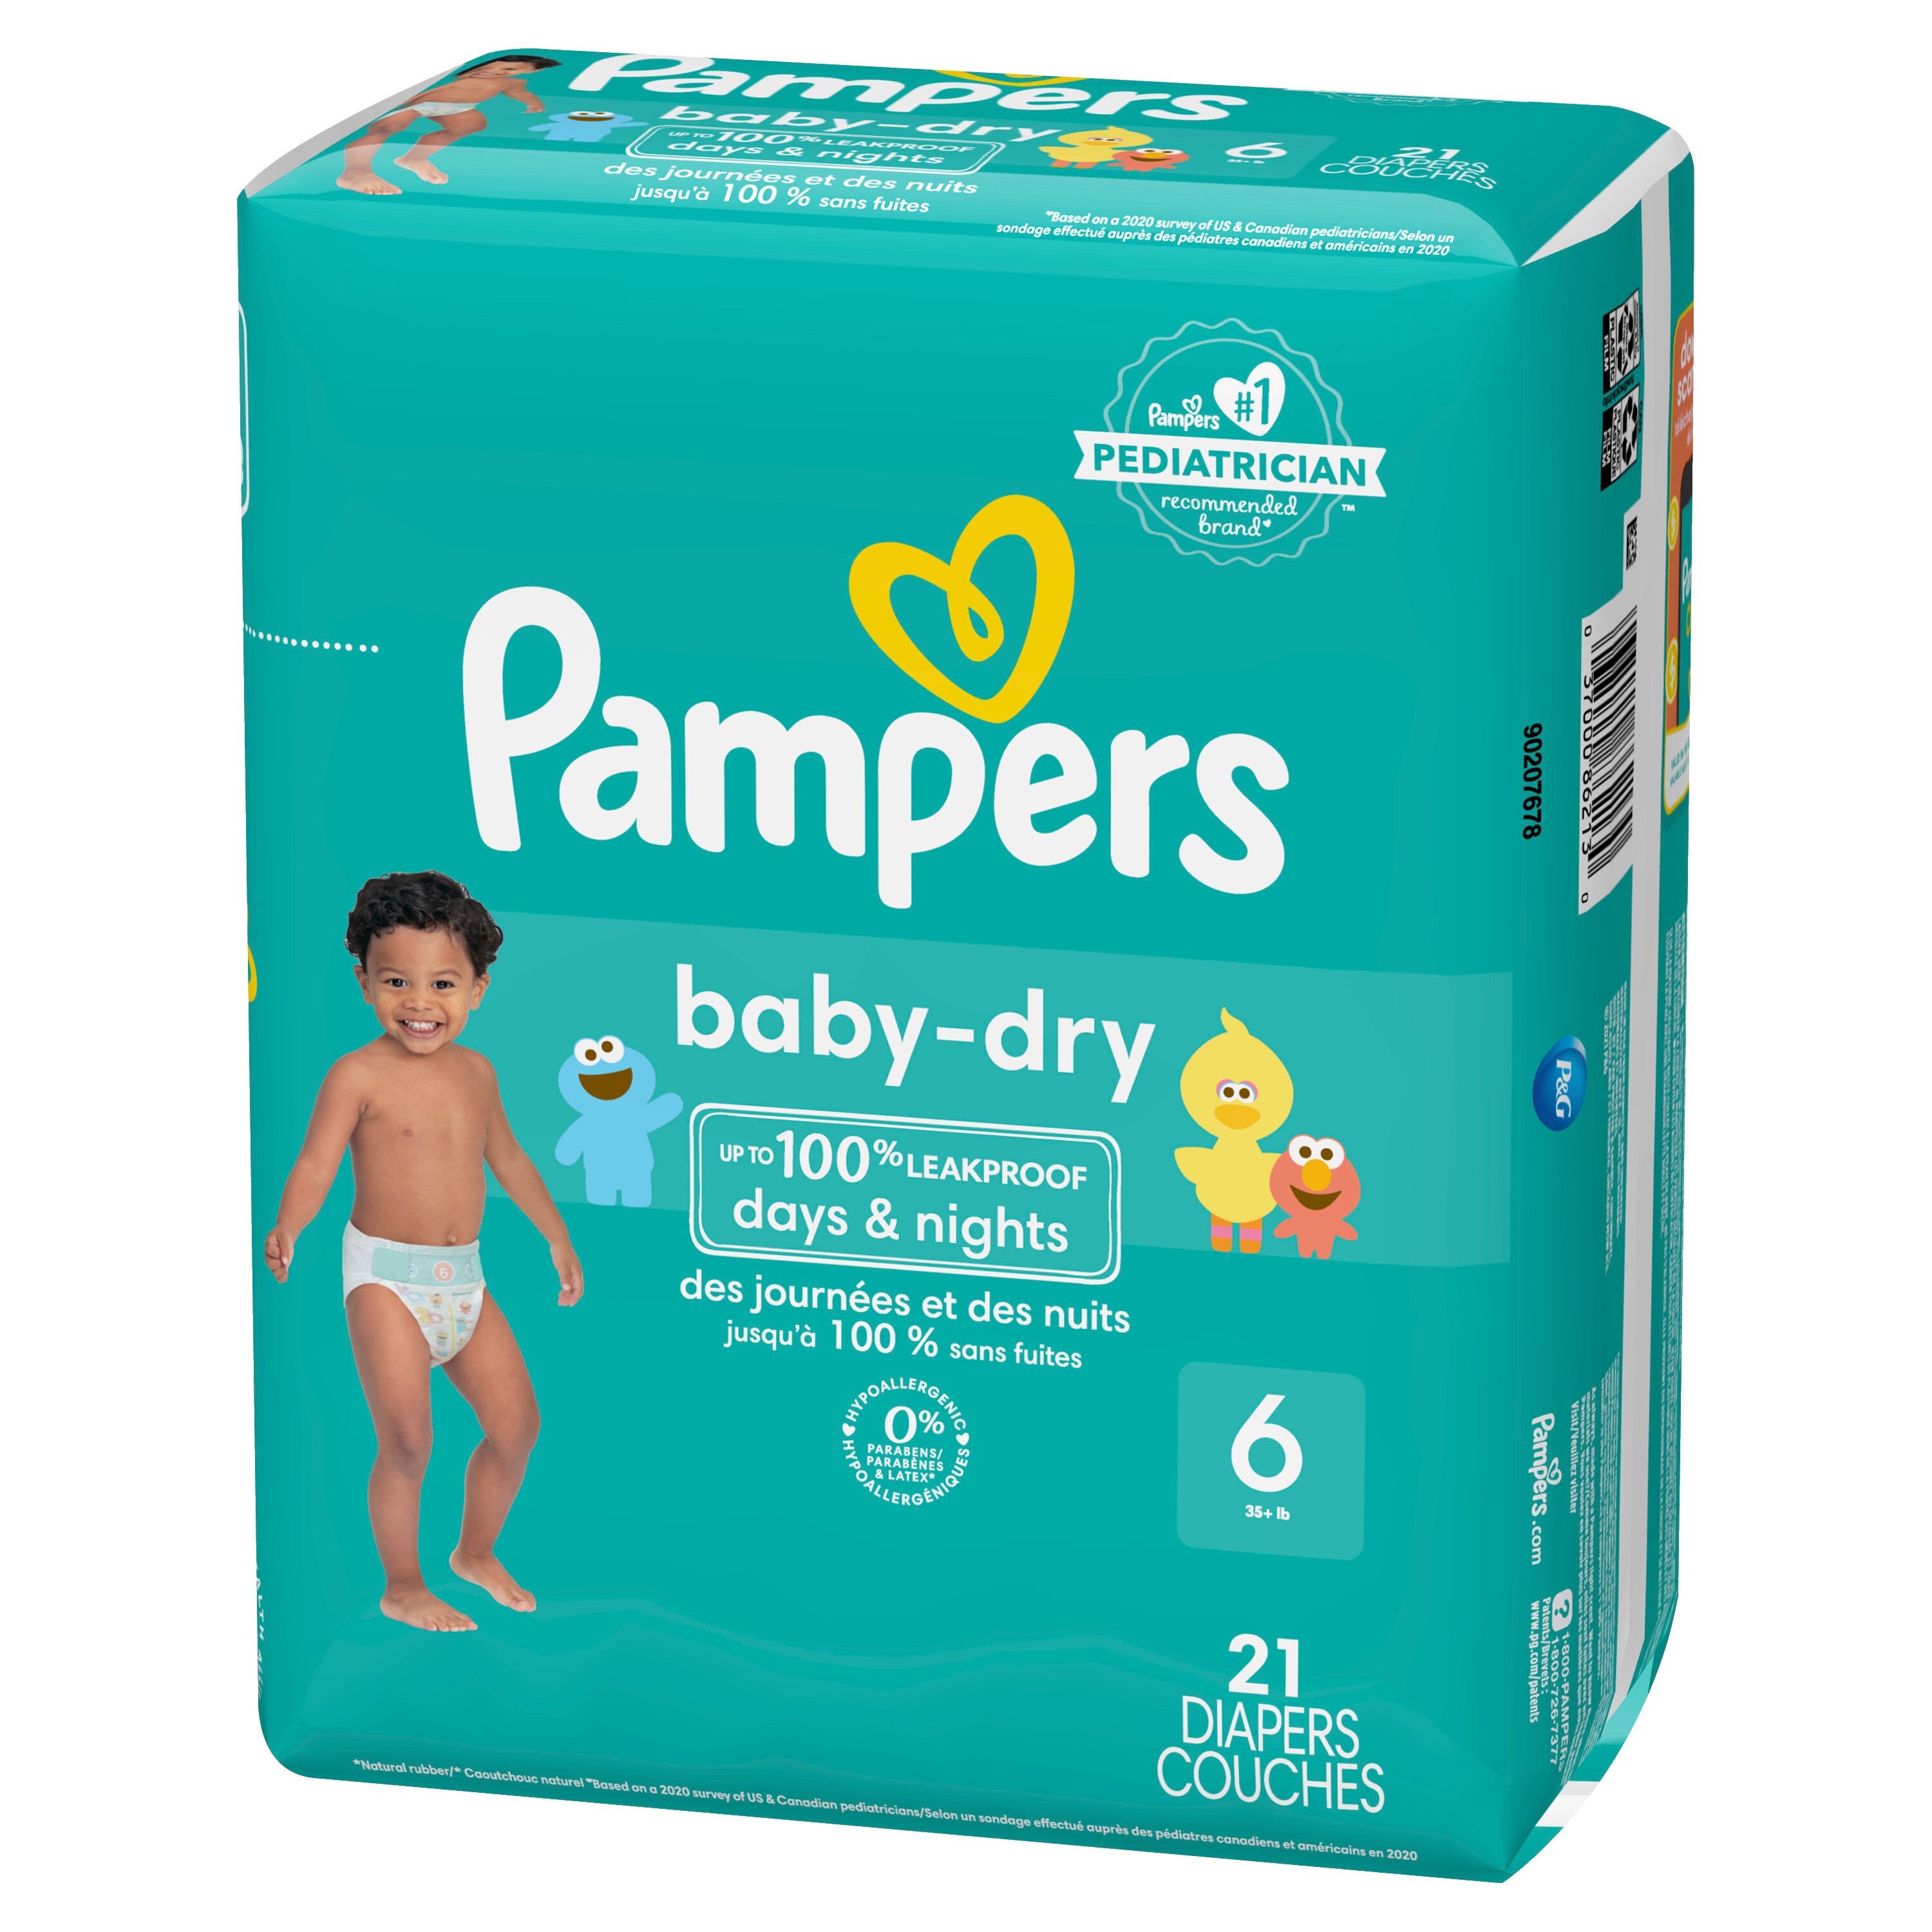 Reis Mars Vegetatie Pampers Baby Dry Pack Diapers | Pick Up In Store TODAY at CVS